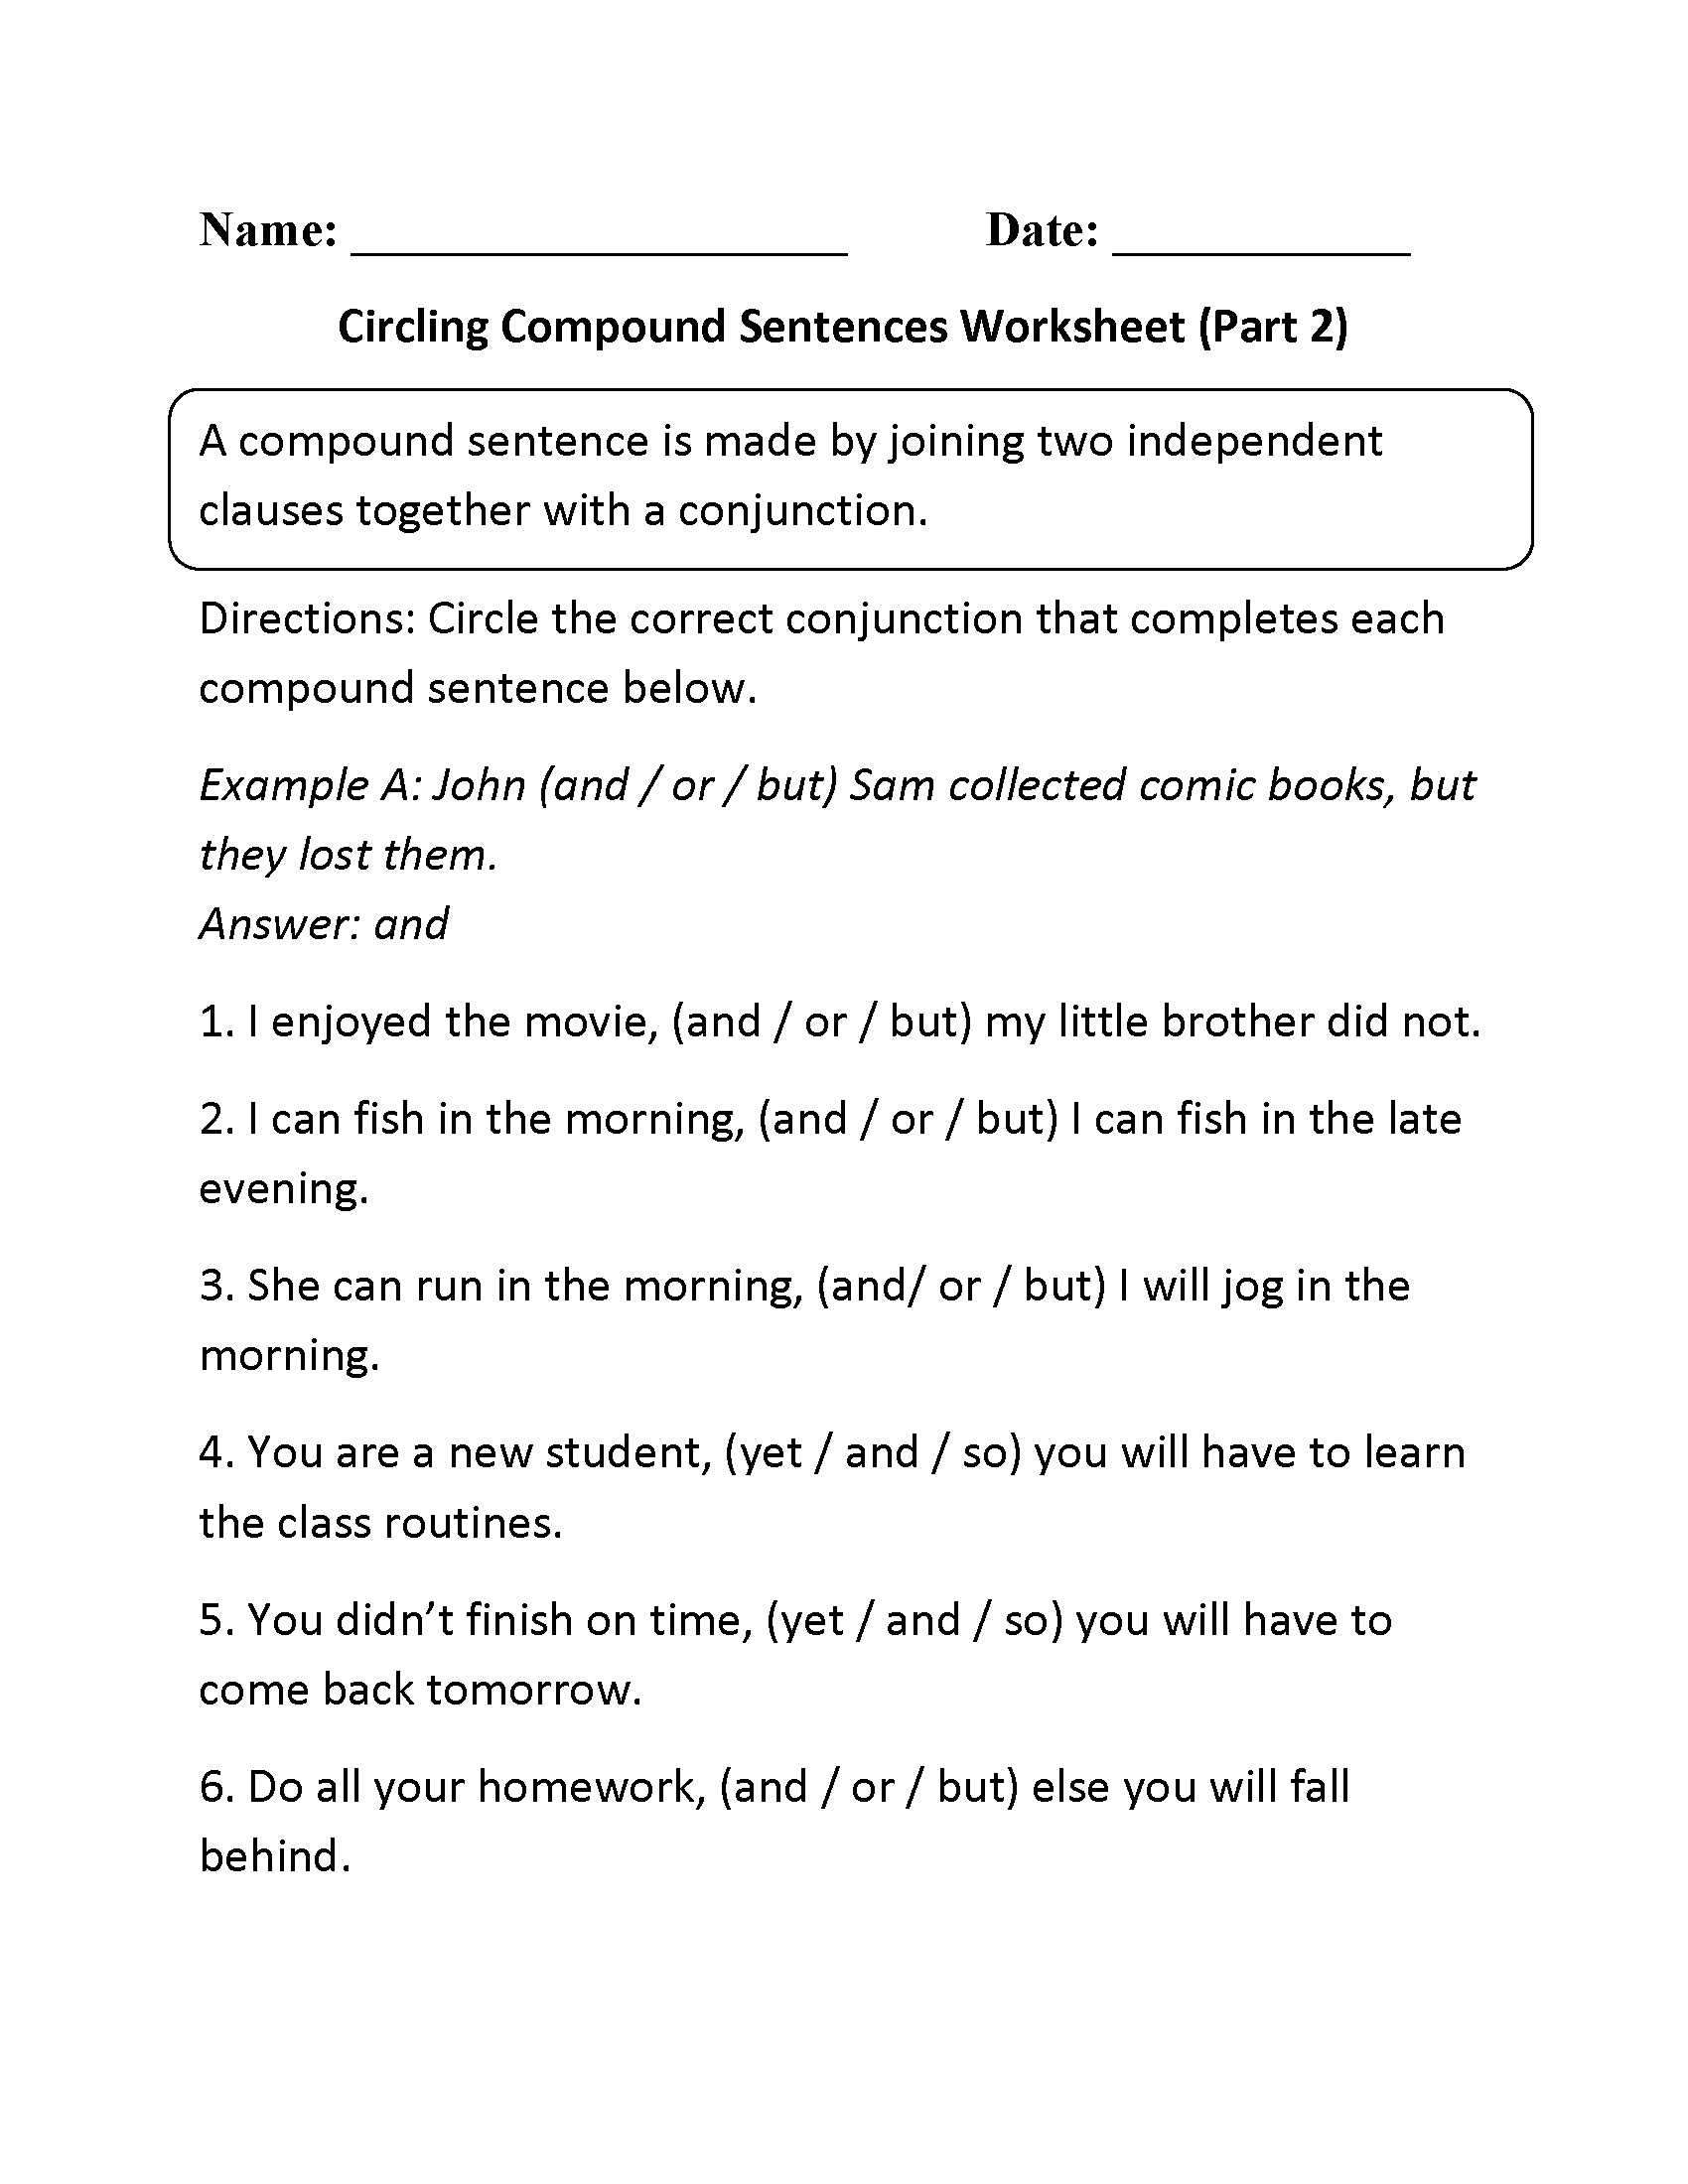 Fragments and Run On Sentences Worksheet Along with Run Sentence Worksheet Answers Choice Image Worksheet for Kids